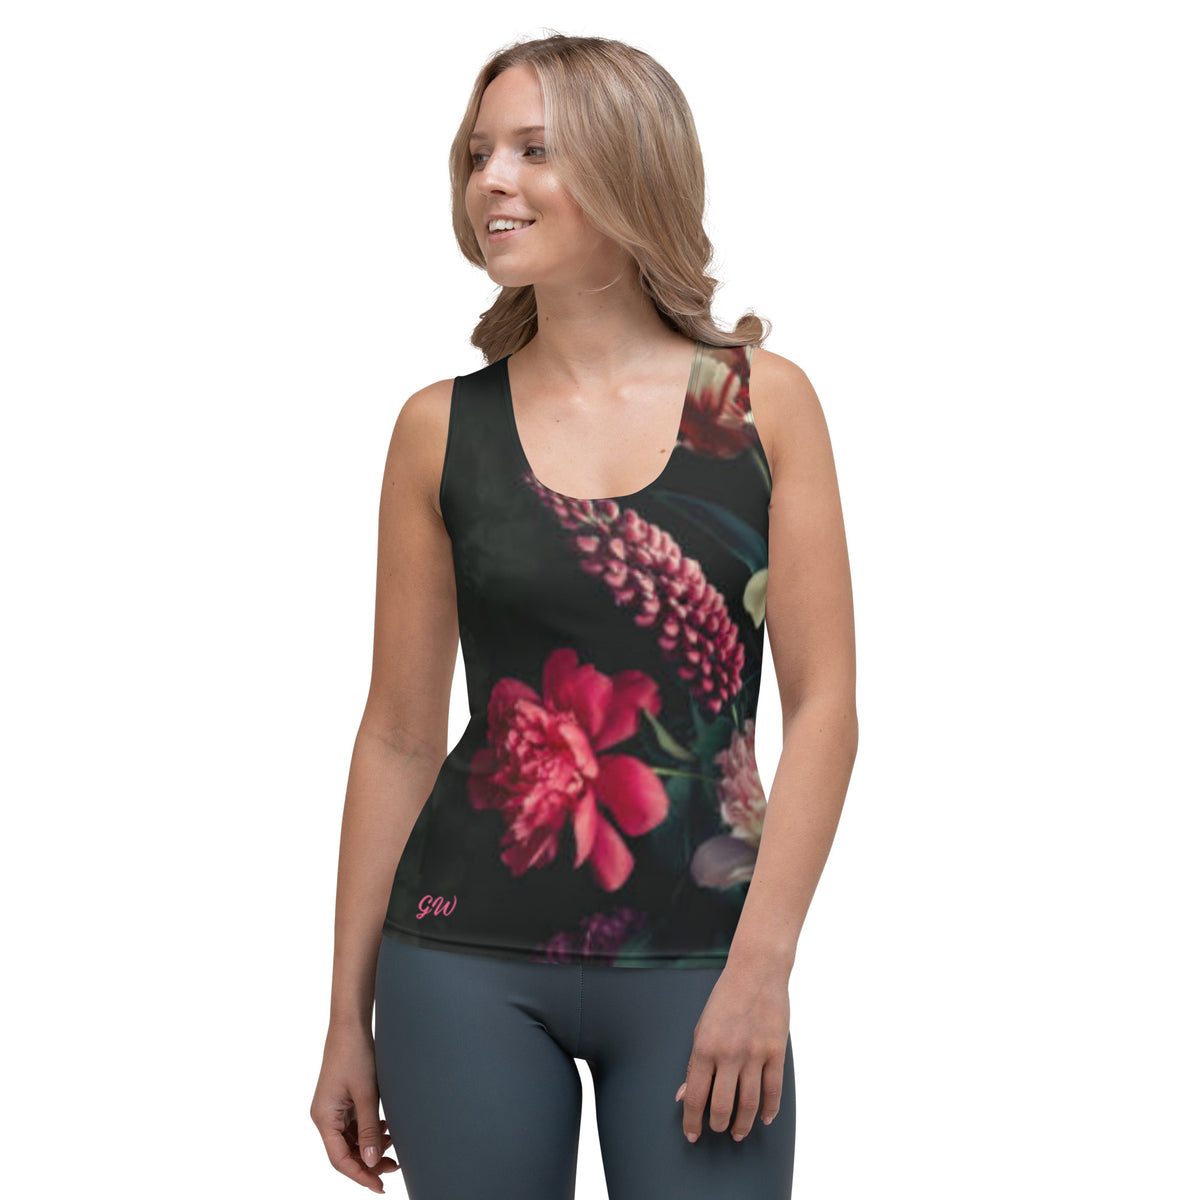 Sublimation Cut & Sew Tank Top runs one size smaller